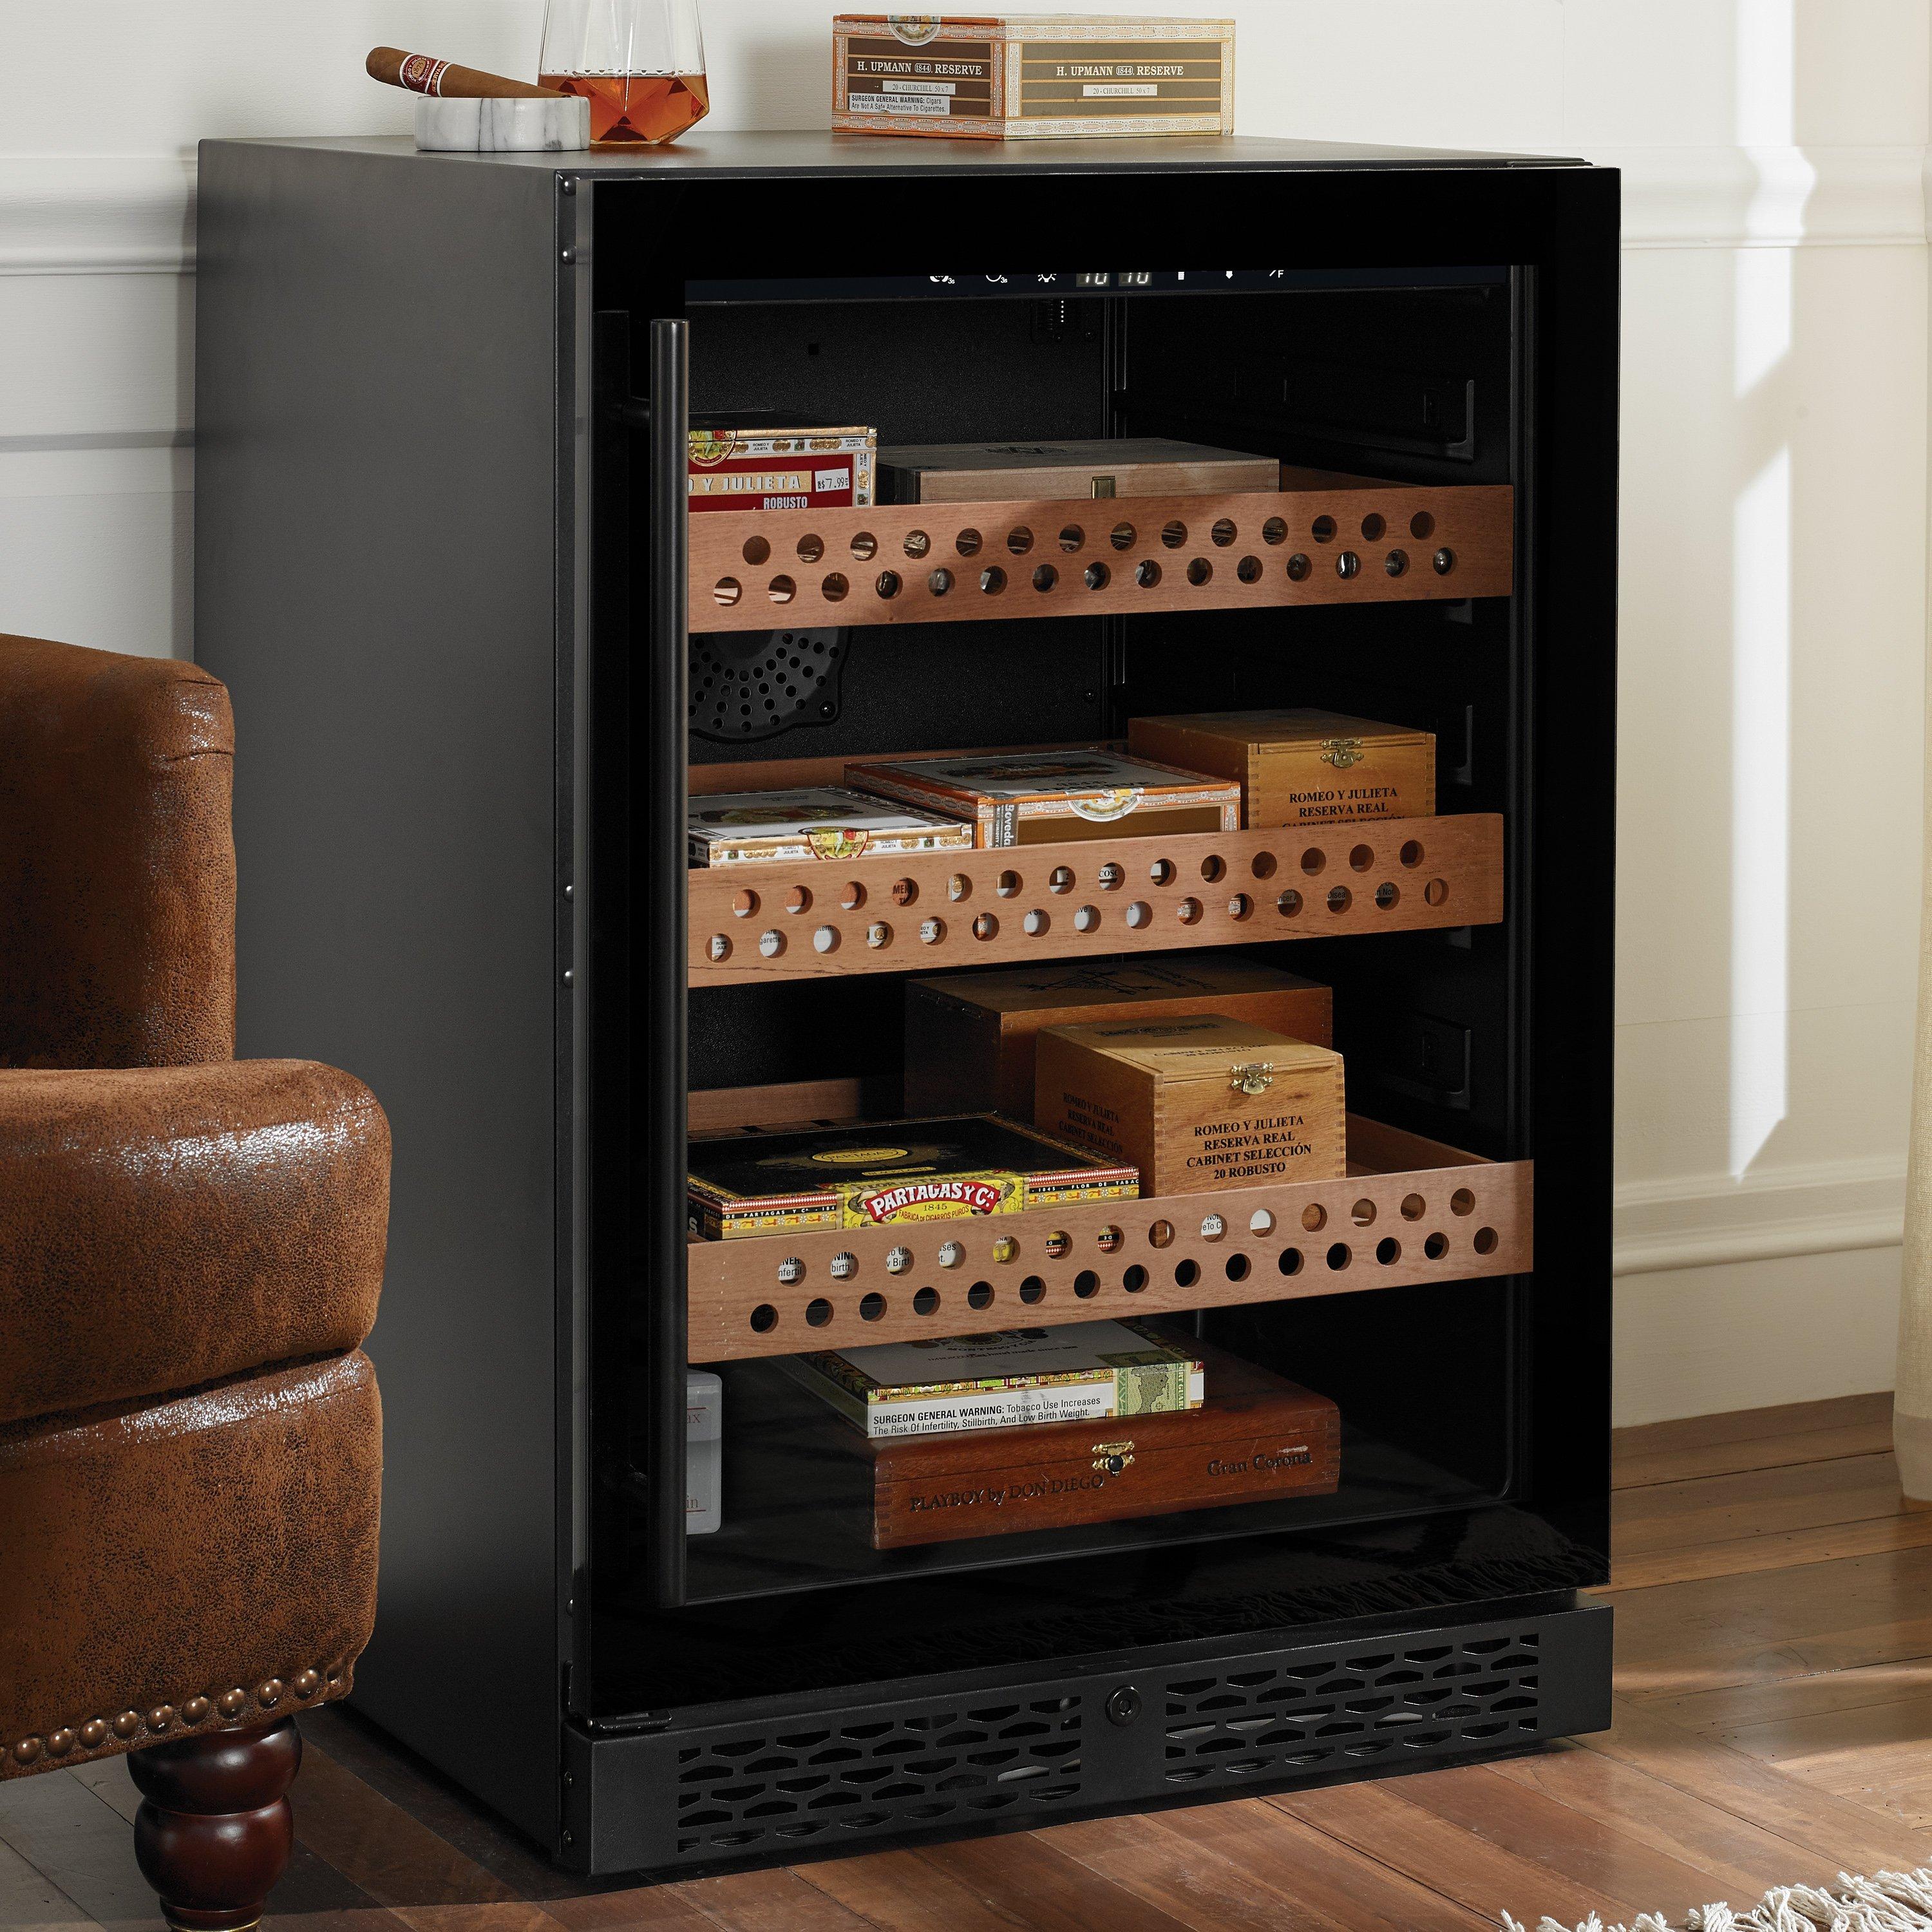 Top 10 Best Cabinet Humidors - Buyer's Guide & Reviews – Humidor